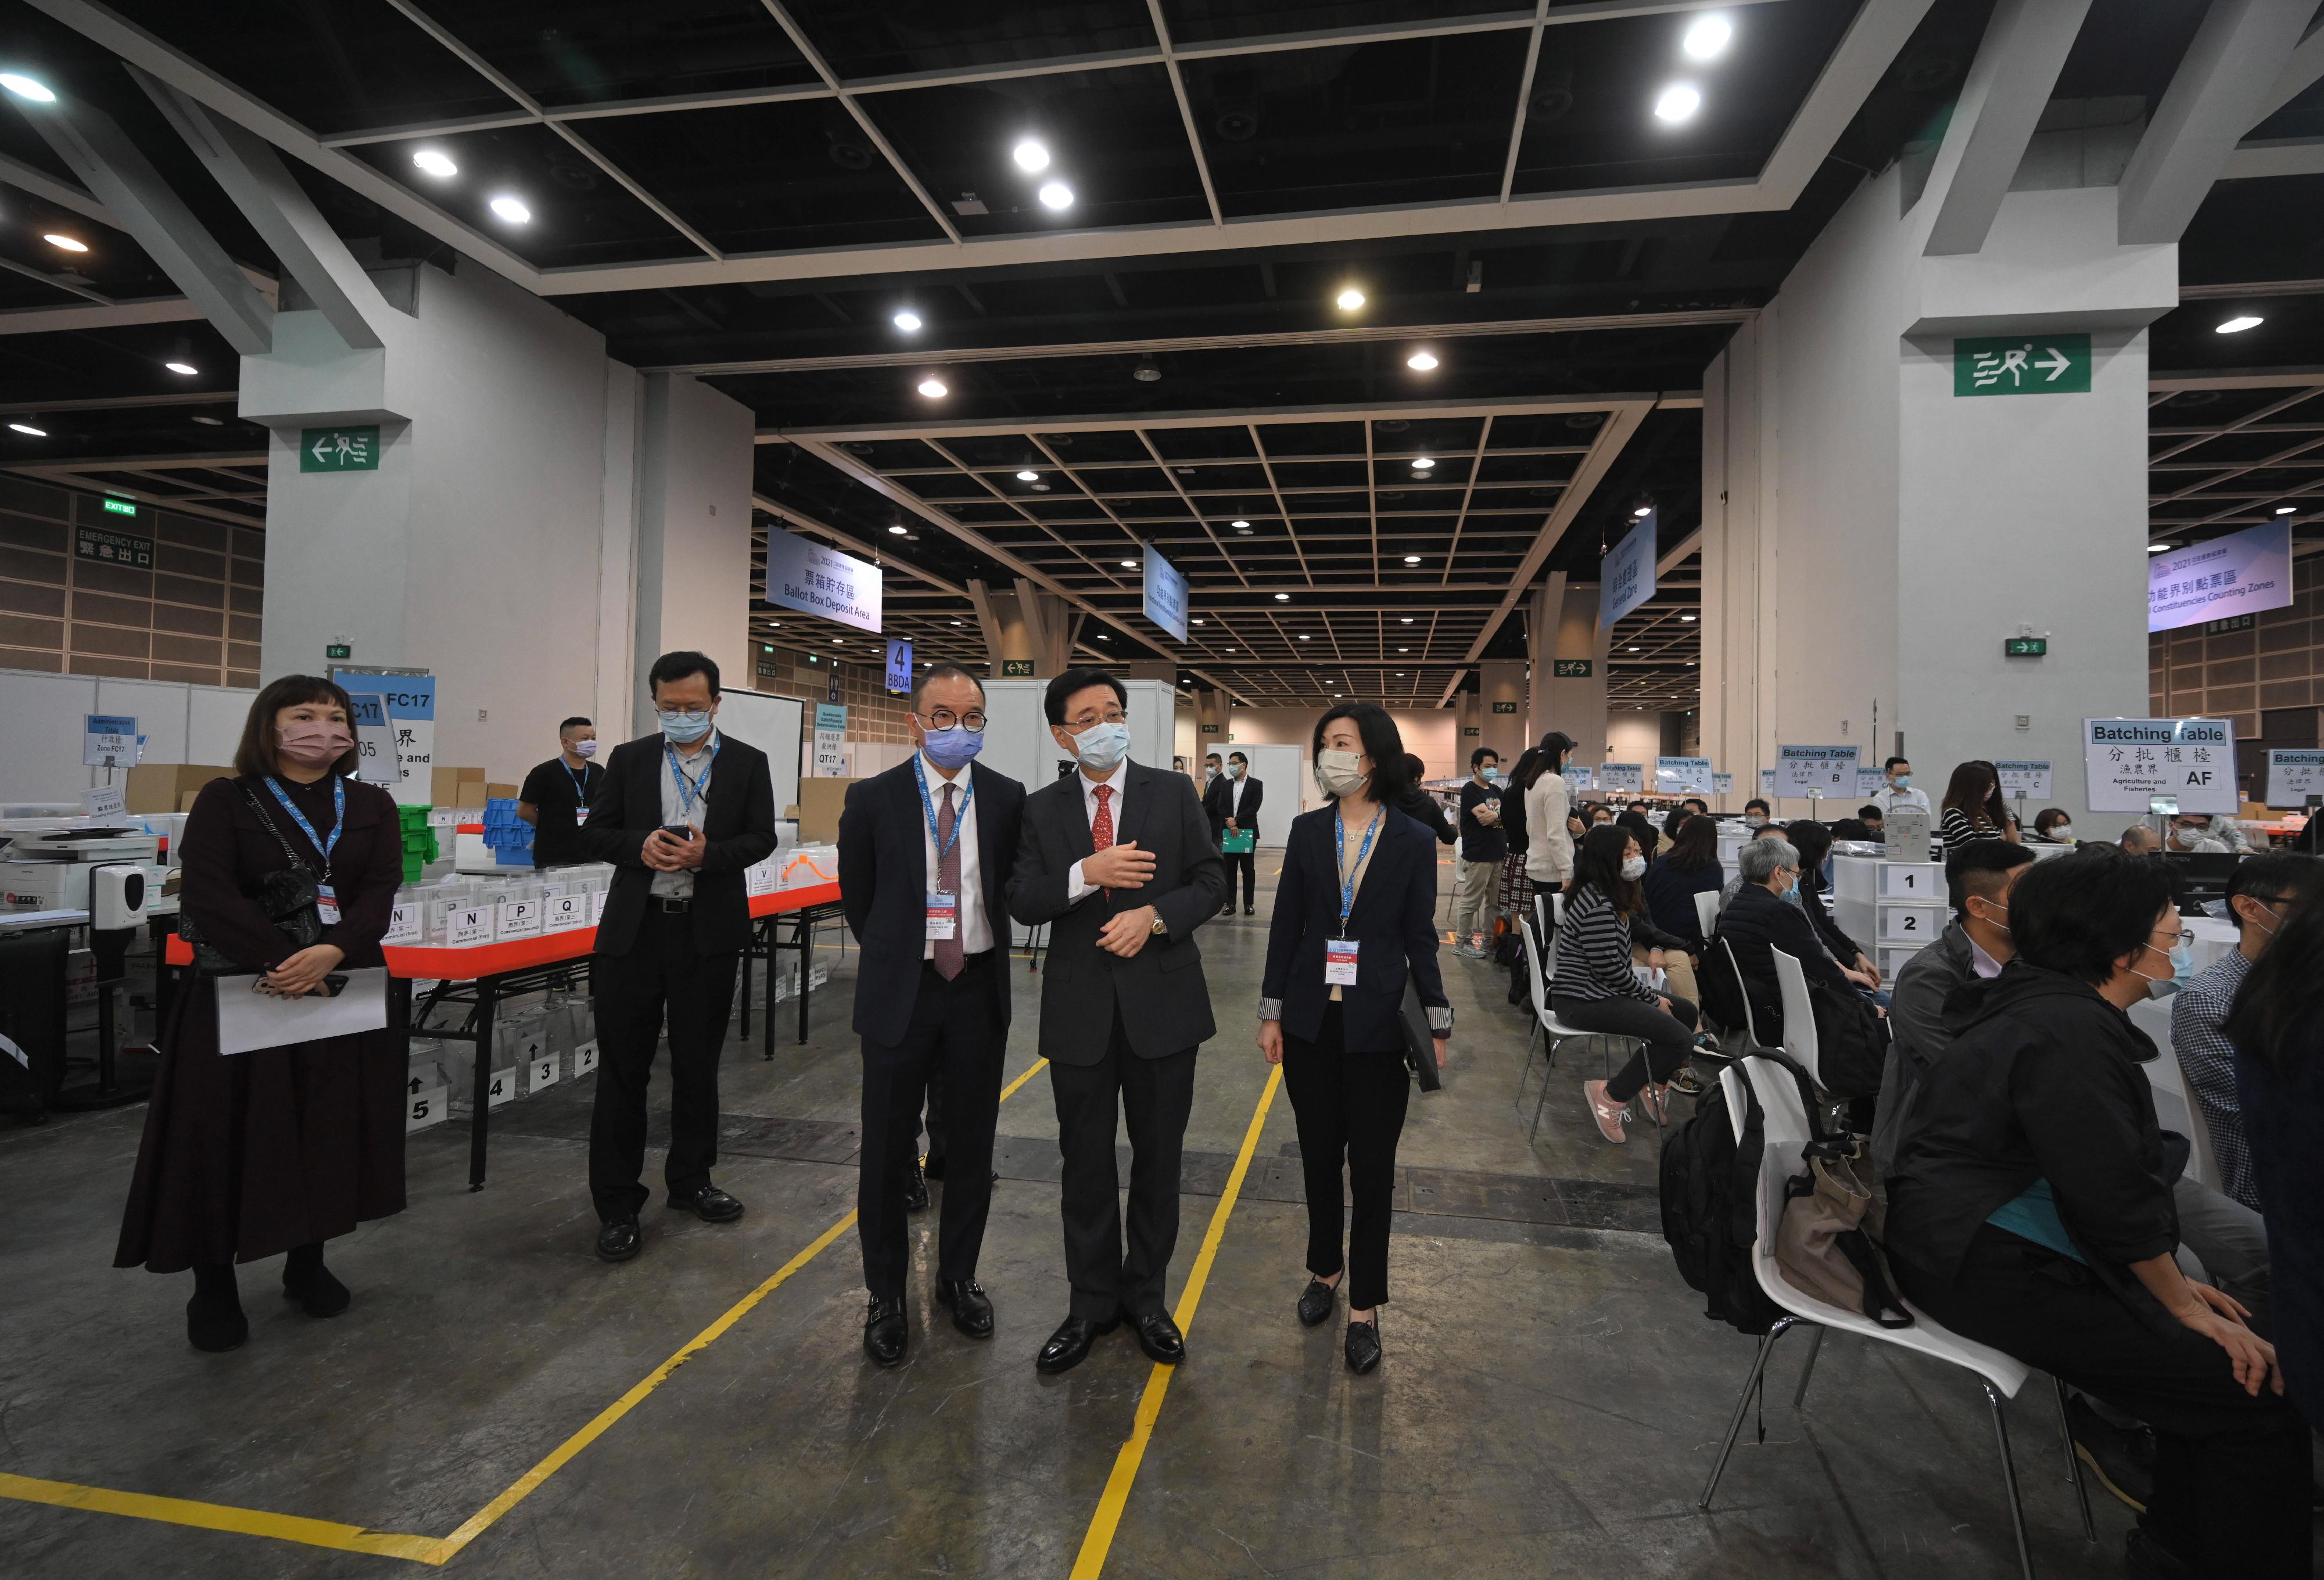 The Chief Secretary for Administration, Mr John Lee, visited the Hong Kong Convention and Exhibition Centre today (December 17) to inspect the preparatory work progress of the central counting station for the Legislative Council General Election. Photo shows Mr Lee (second right) and the Secretary for Constitutional and Mainland Affairs, Mr Erick Tsang Kwok-wai (third right), inspecting the practical sessions and simulated activities on-site.